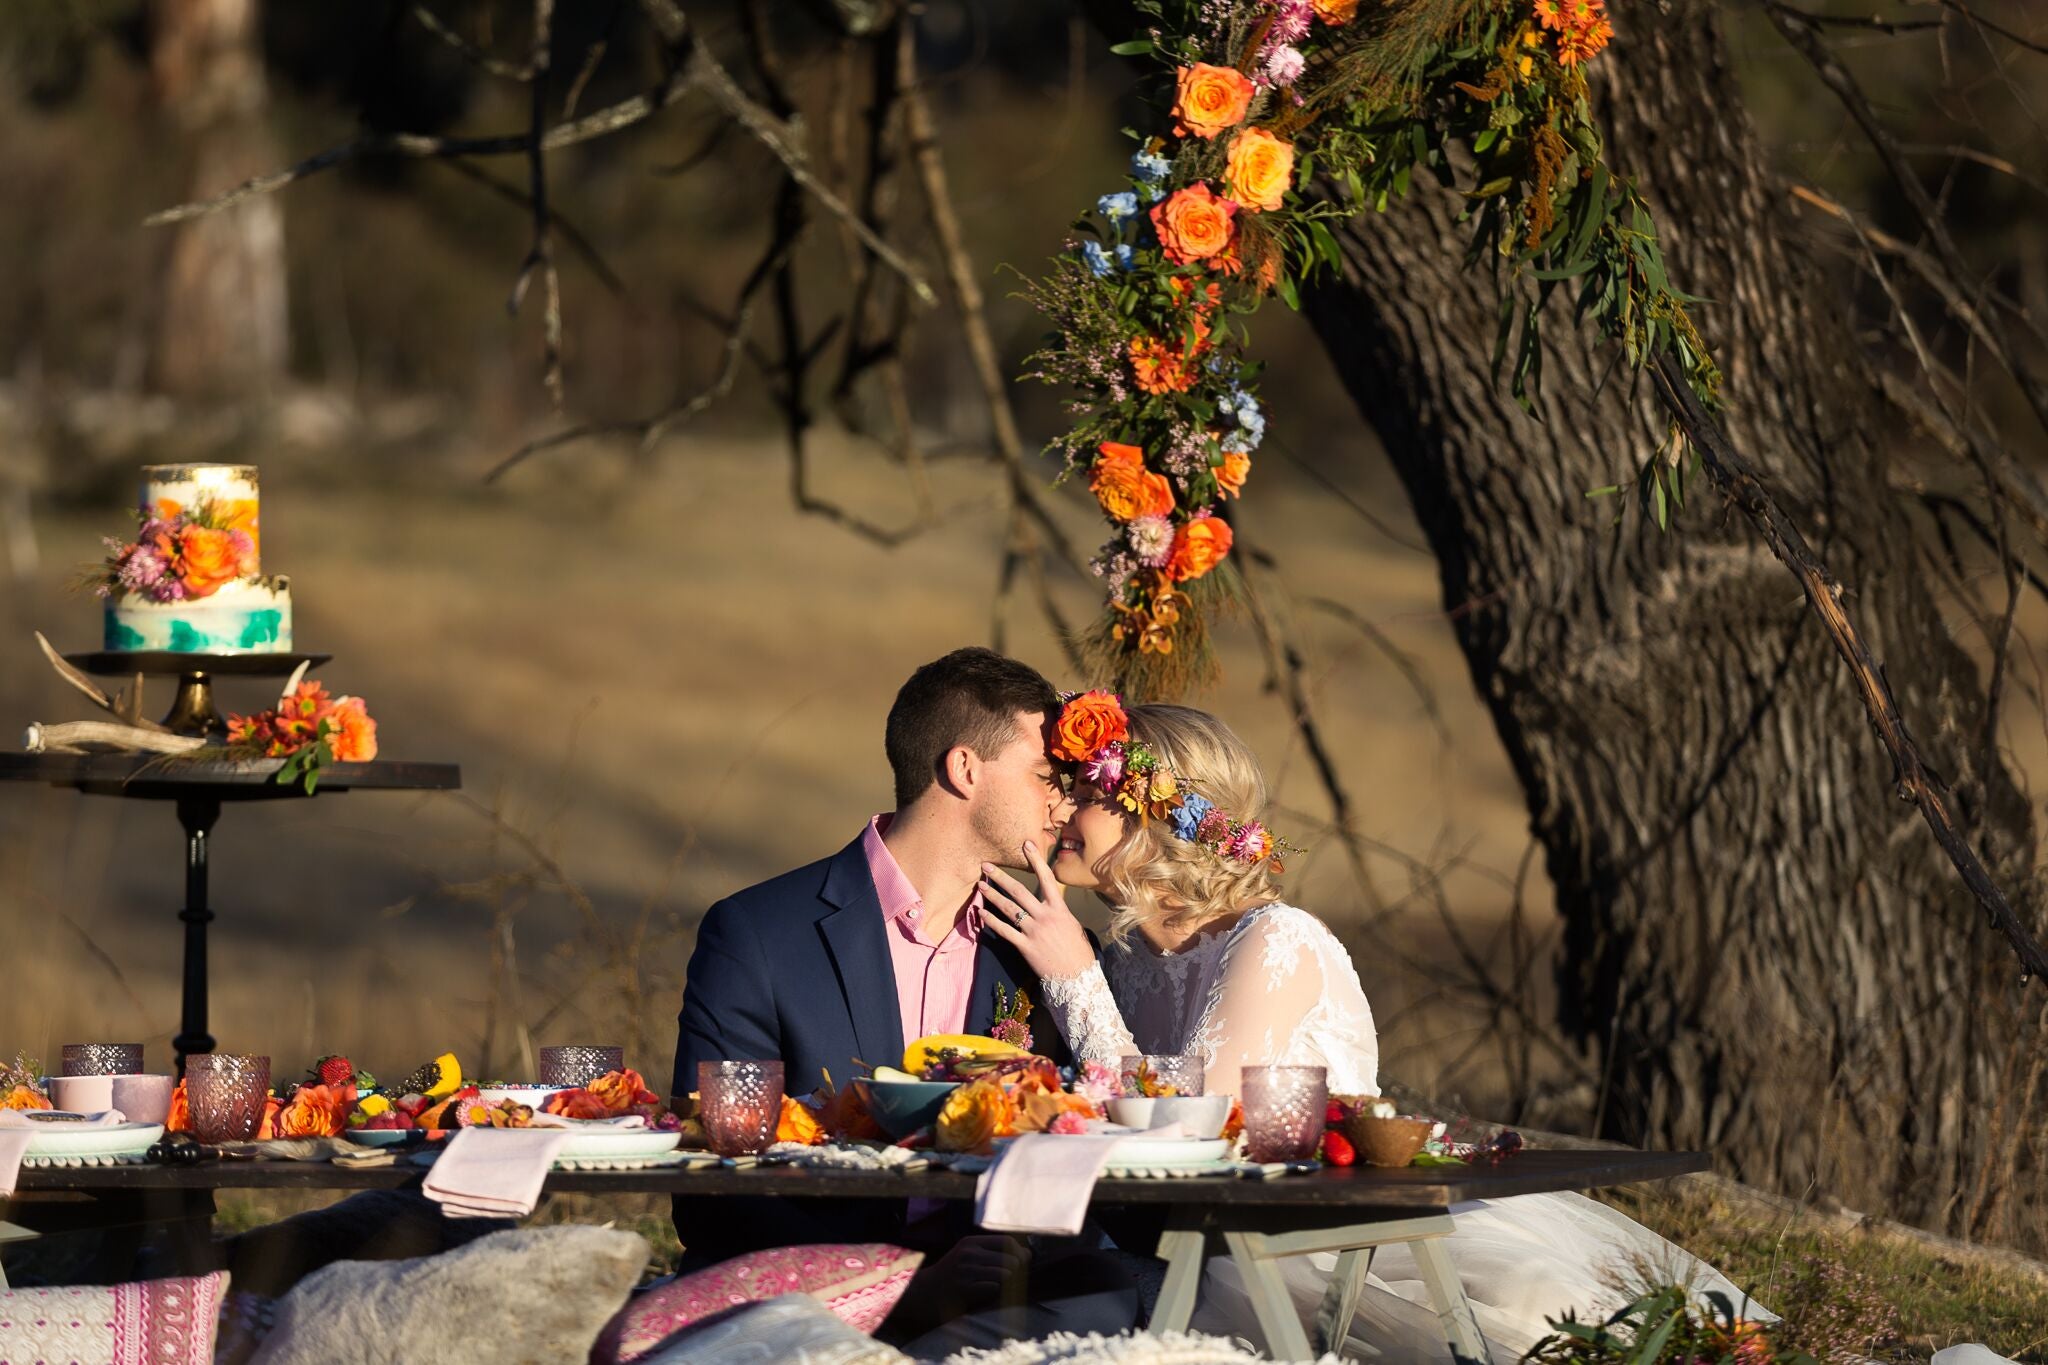 The Bohemian Bride - Bright and beautiful wedding inspiration with a Blue Mountains twist